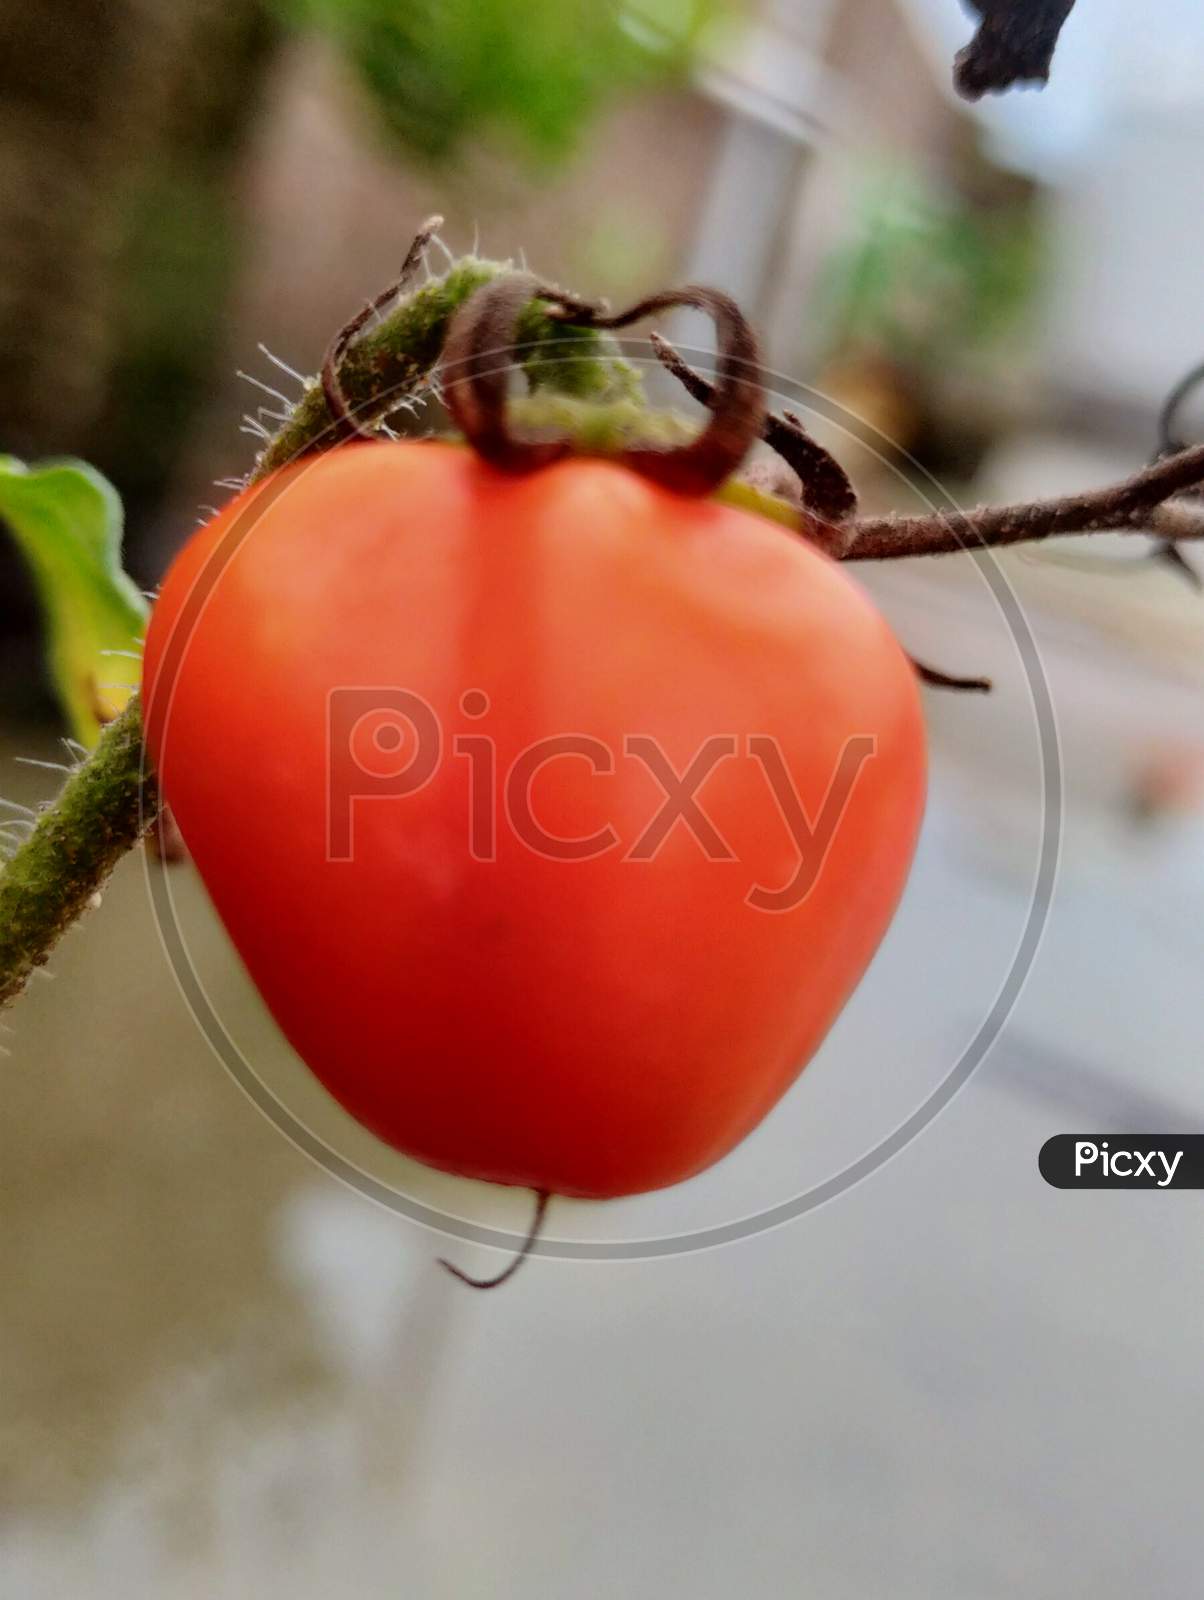 Tomato and plant leaves green macro photography